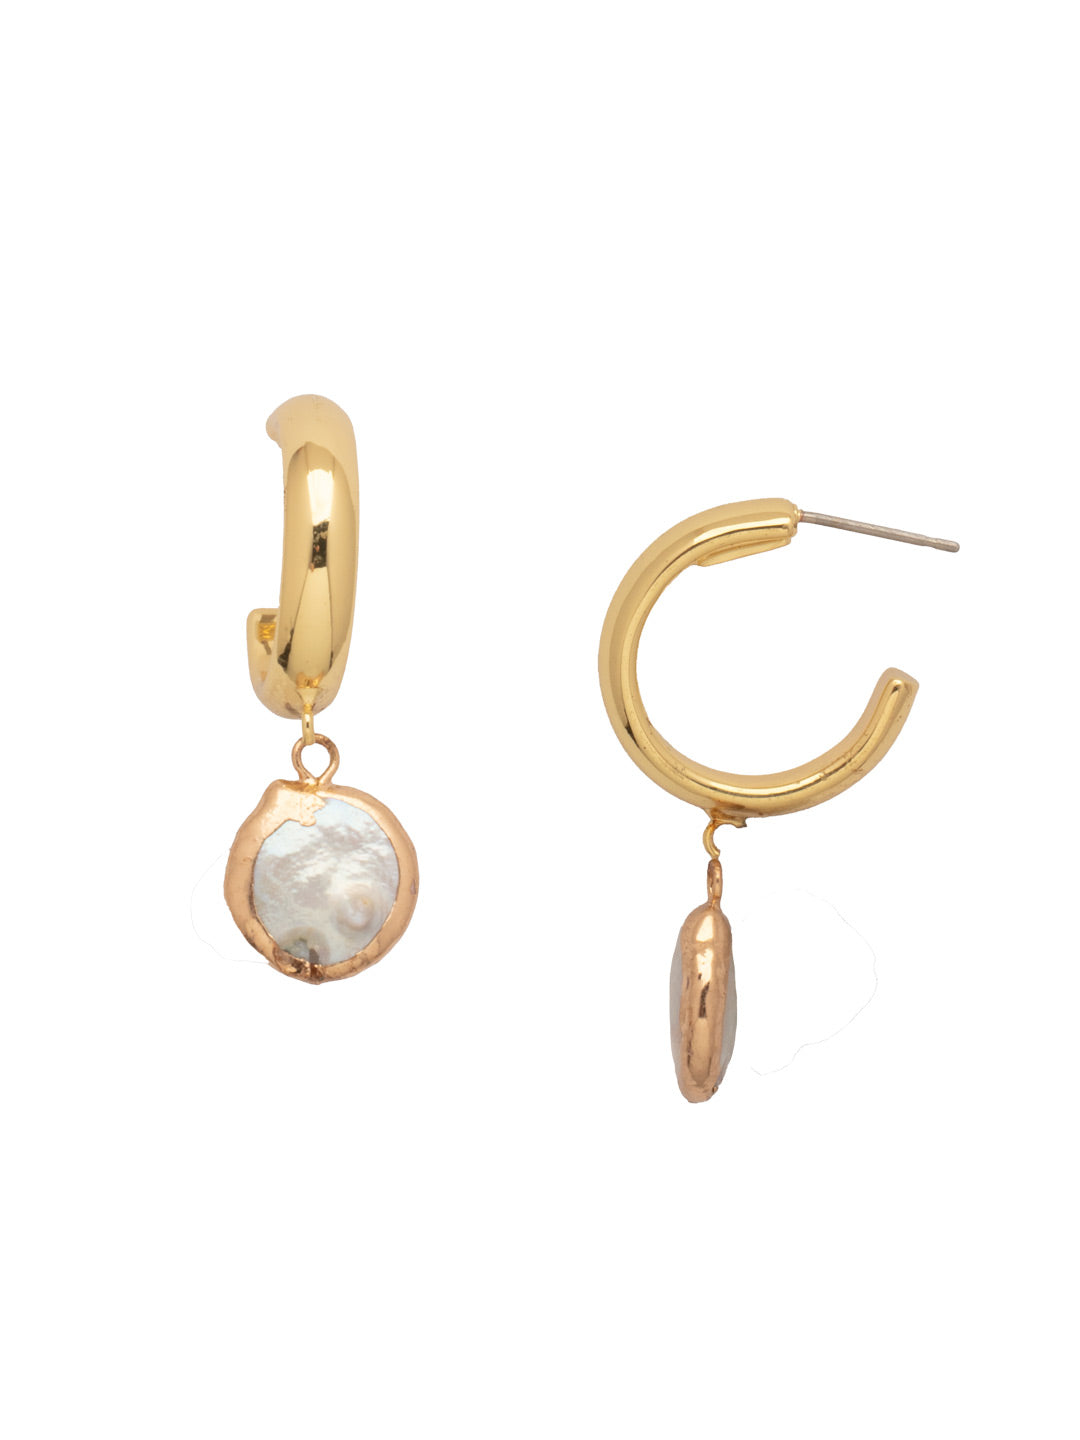 Penny Pearl Hoop Earrings - EFM14BGMDP - <p>The Penny Pearl Hoop Earrings feature a freshwater coin pearl dangling from a metal hoop. From Sorrelli's Modern Pearl collection in our Bright Gold-tone finish.</p>